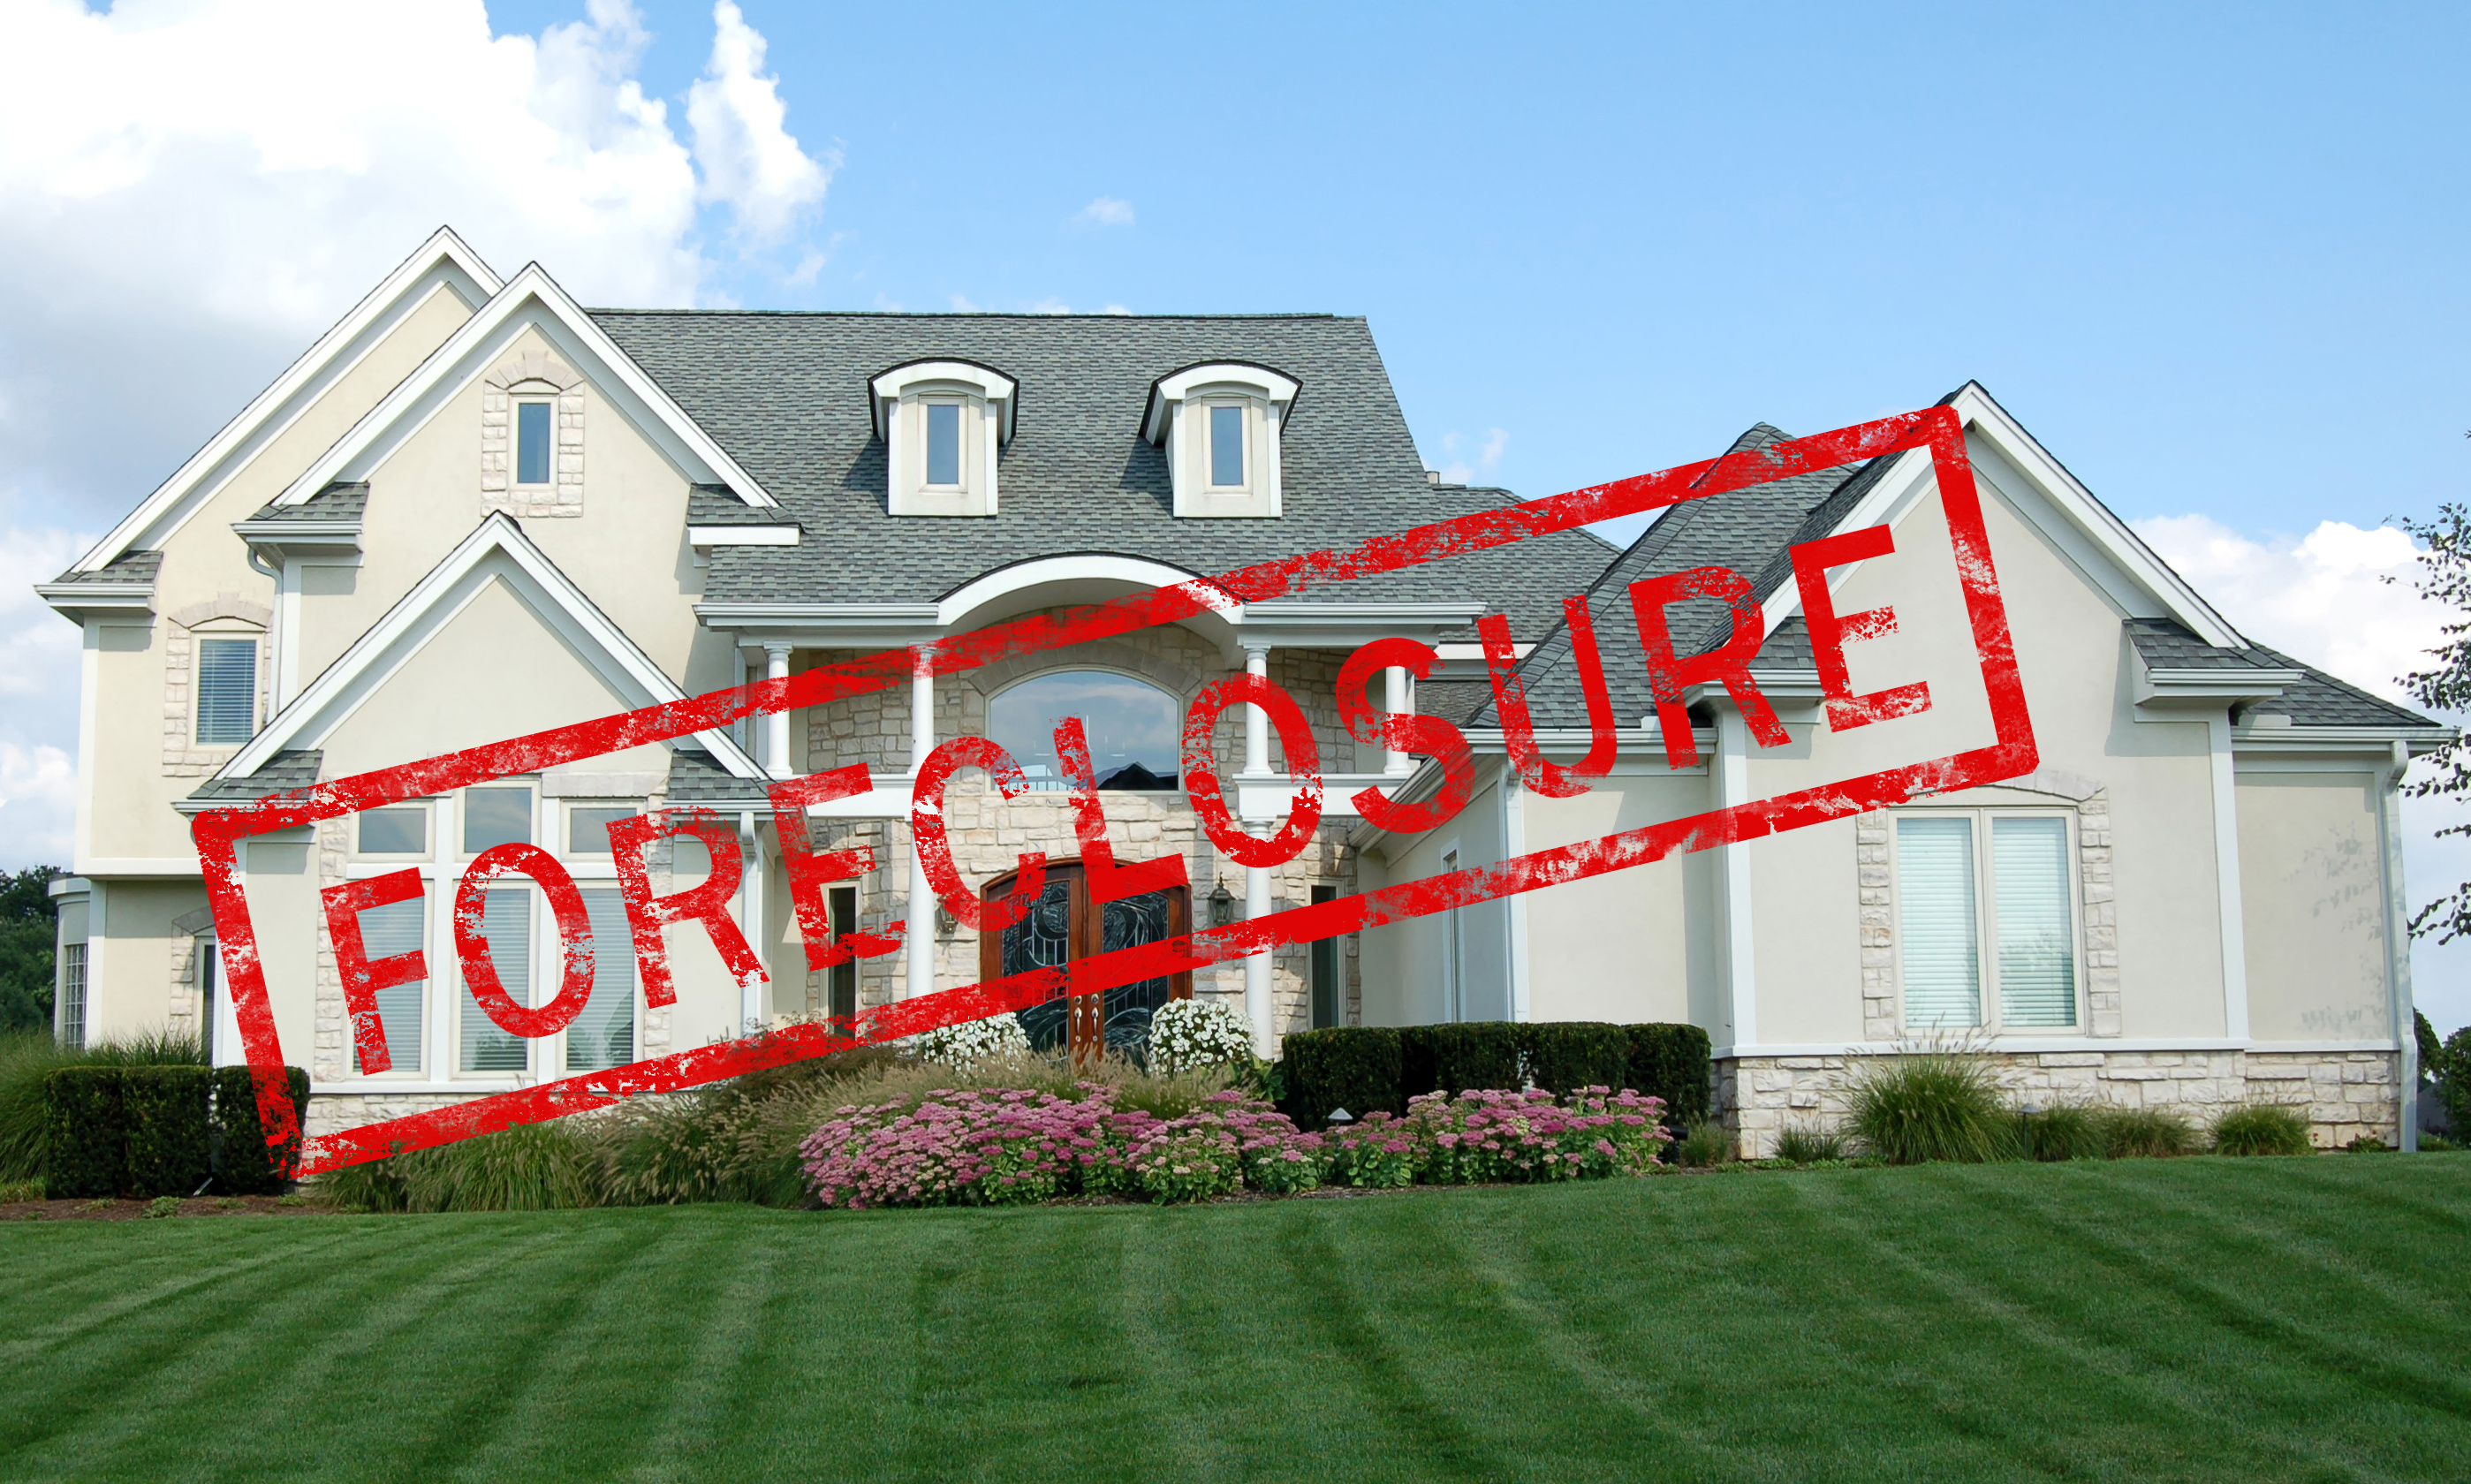 Call Young Real Estate Appraisals when you need valuations regarding Riverside foreclosures